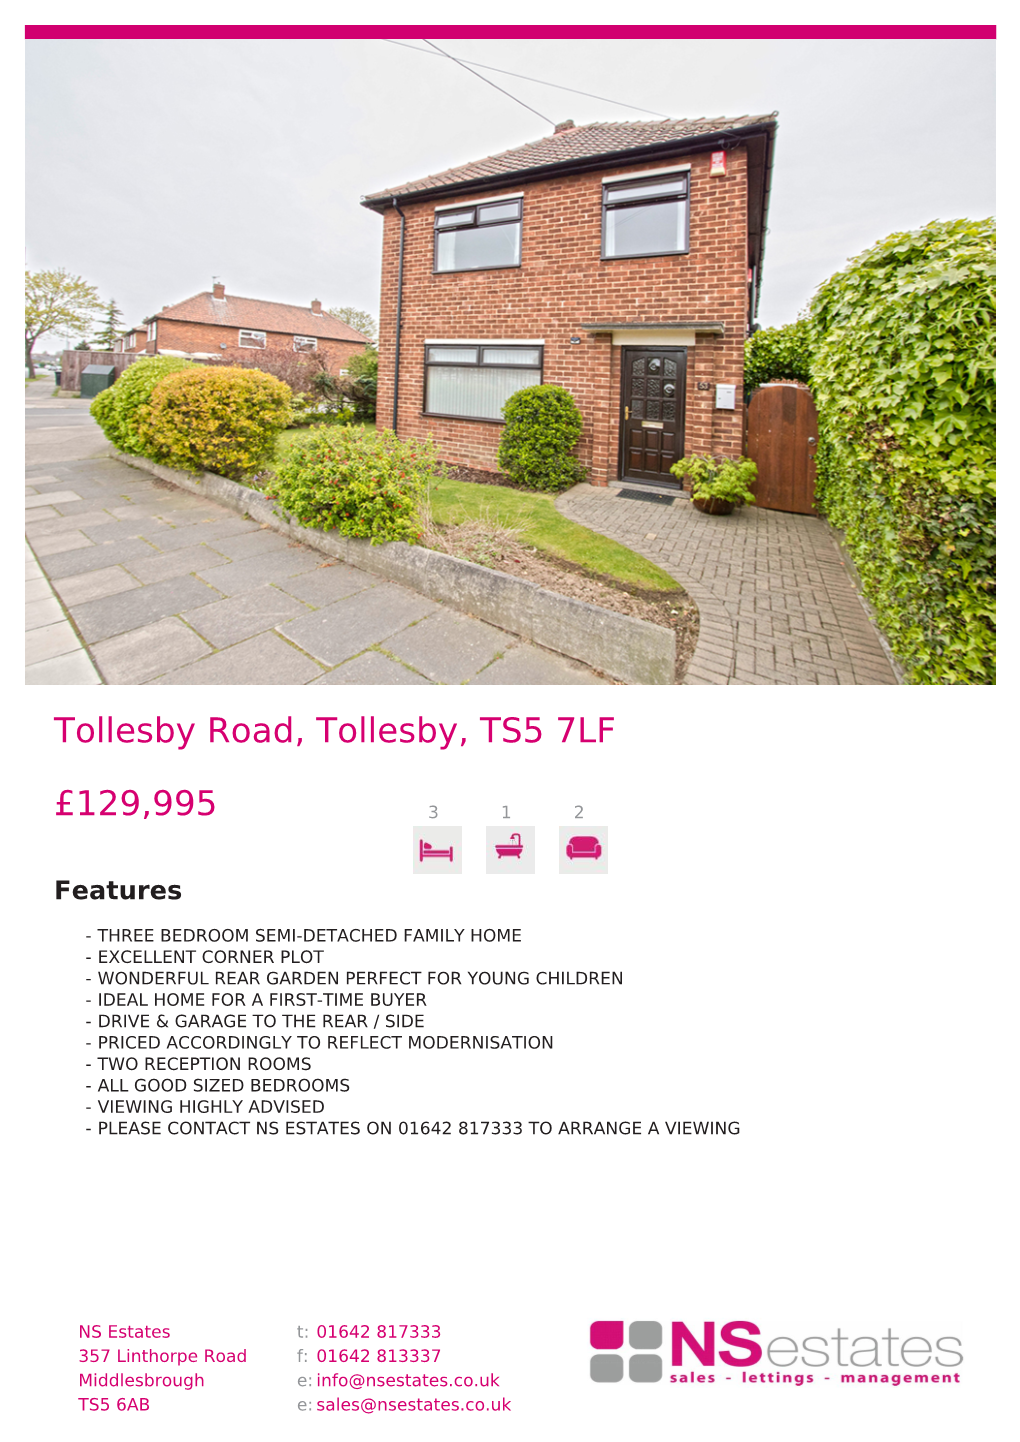 Tollesby Road, Tollesby, TS5 7LF £129995